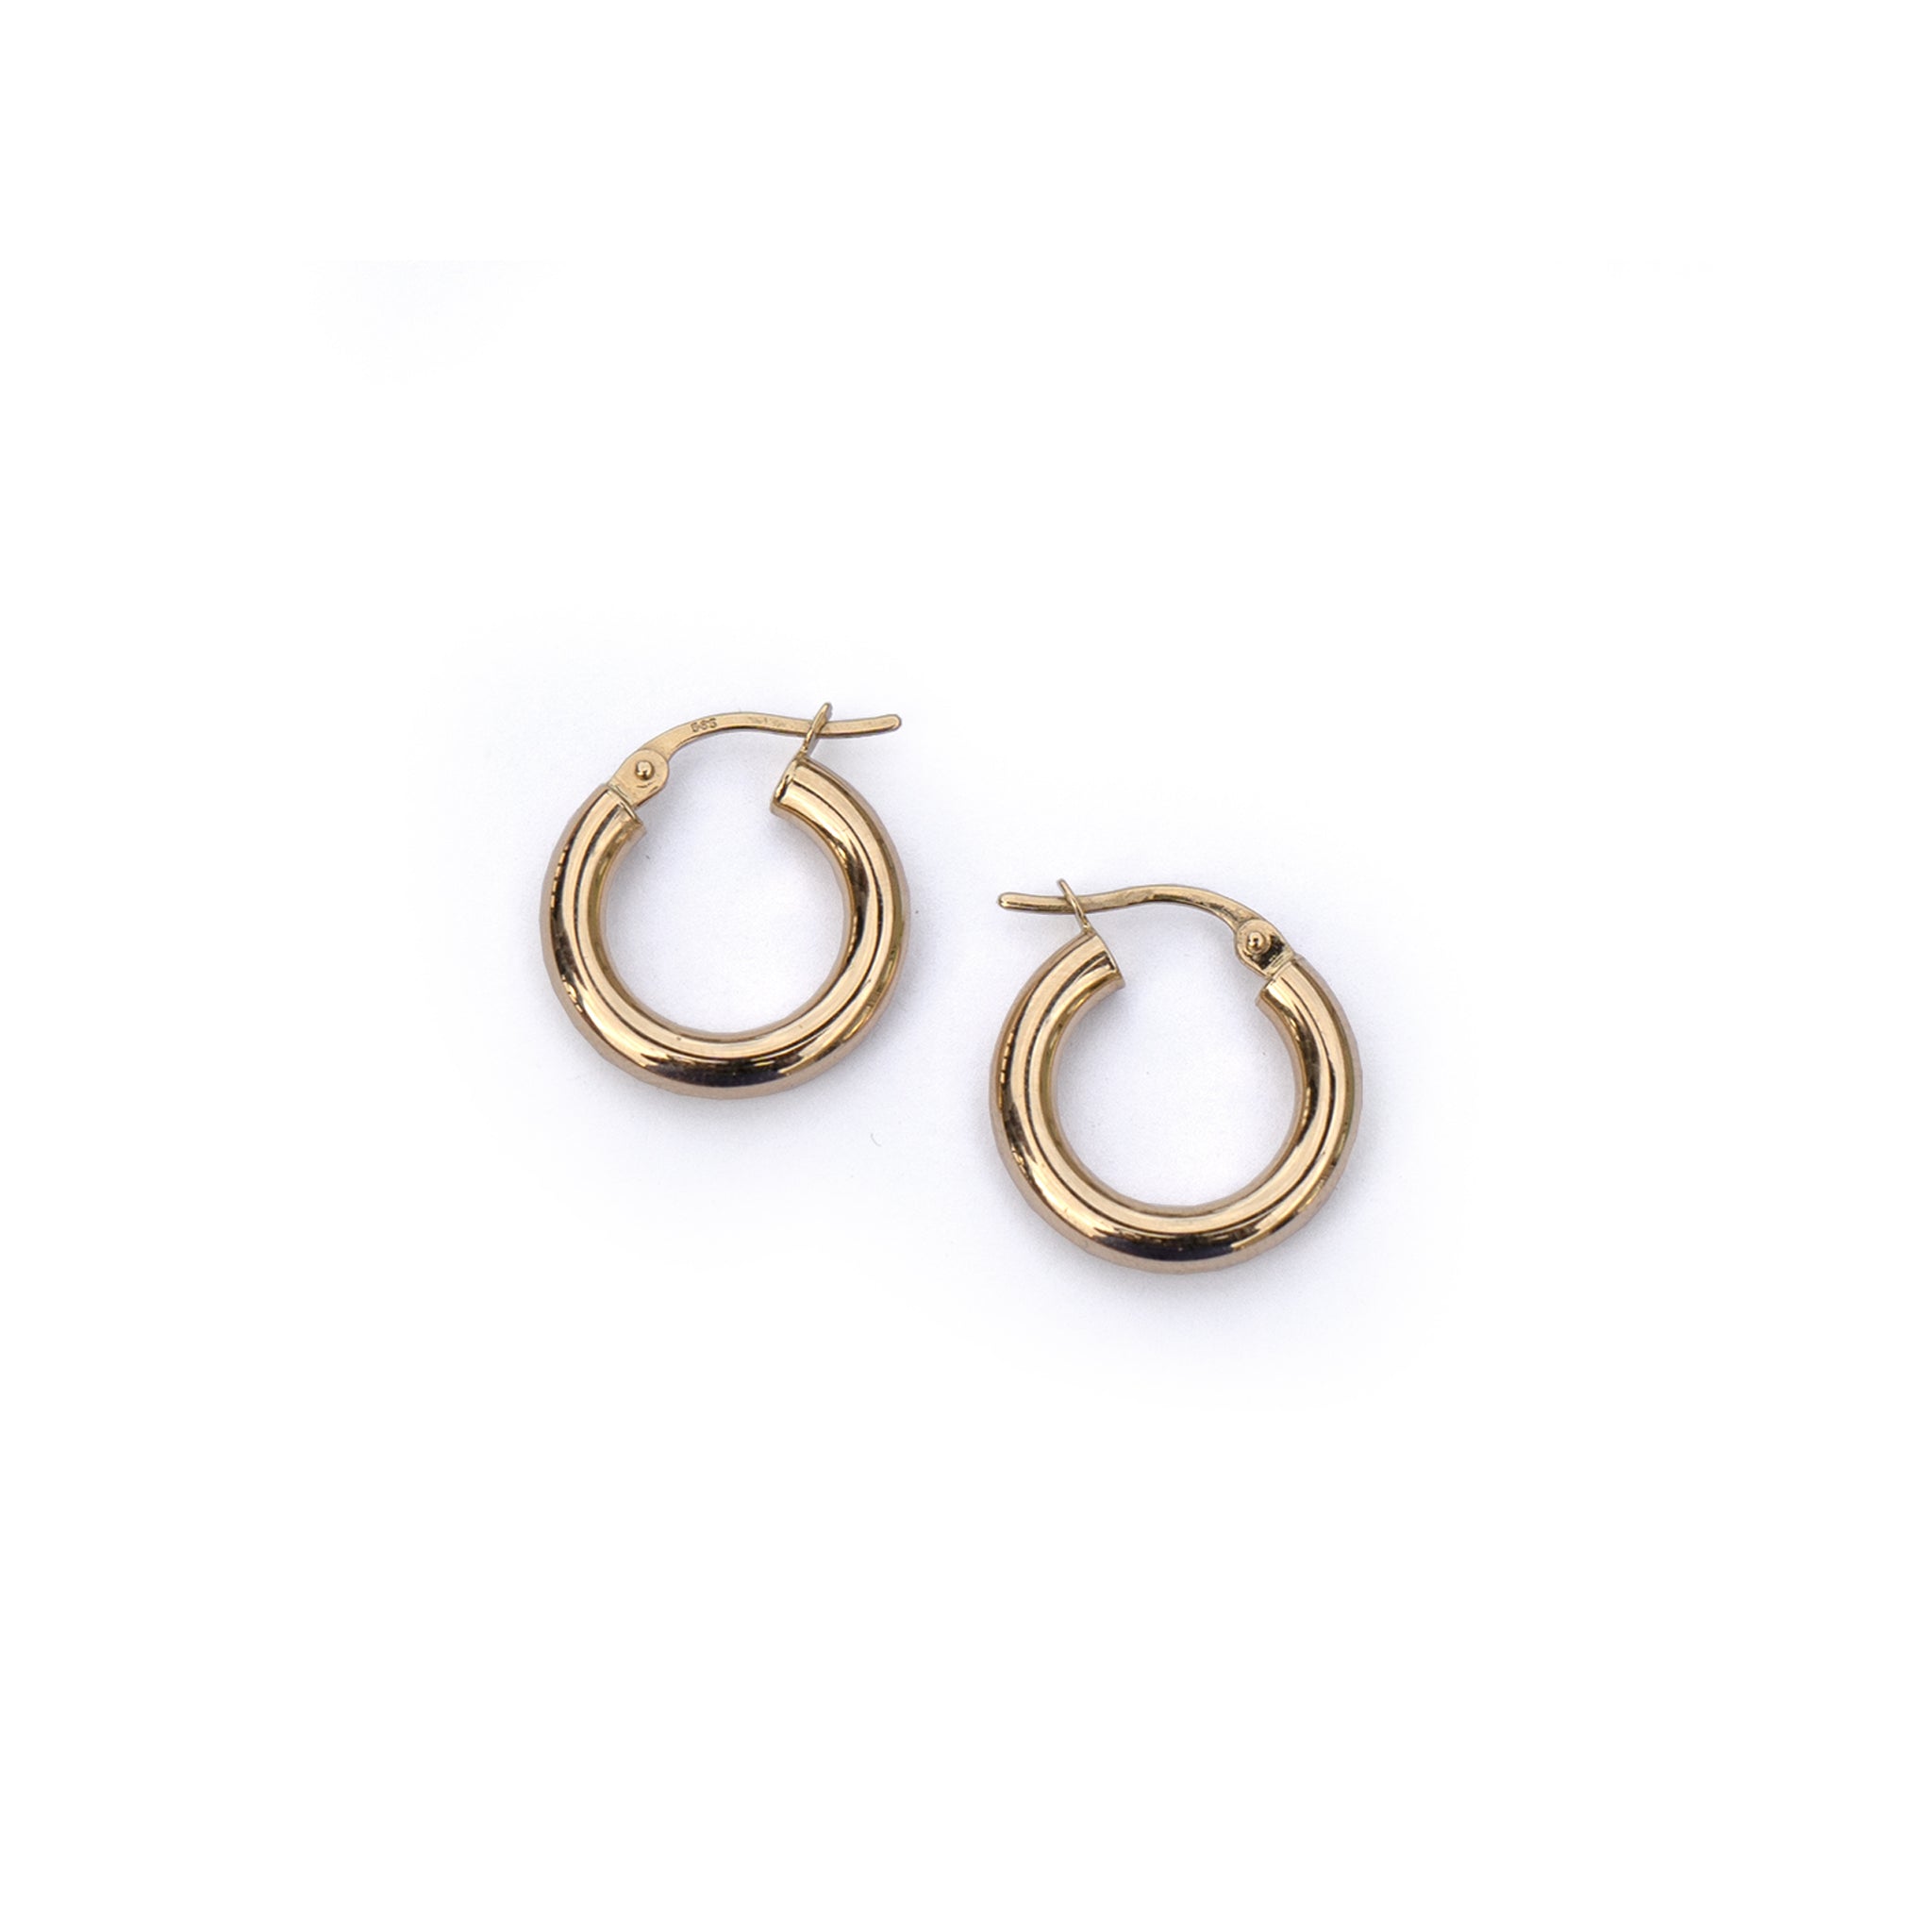 10 mm gold hoops from Lico Jewelry in Montreal